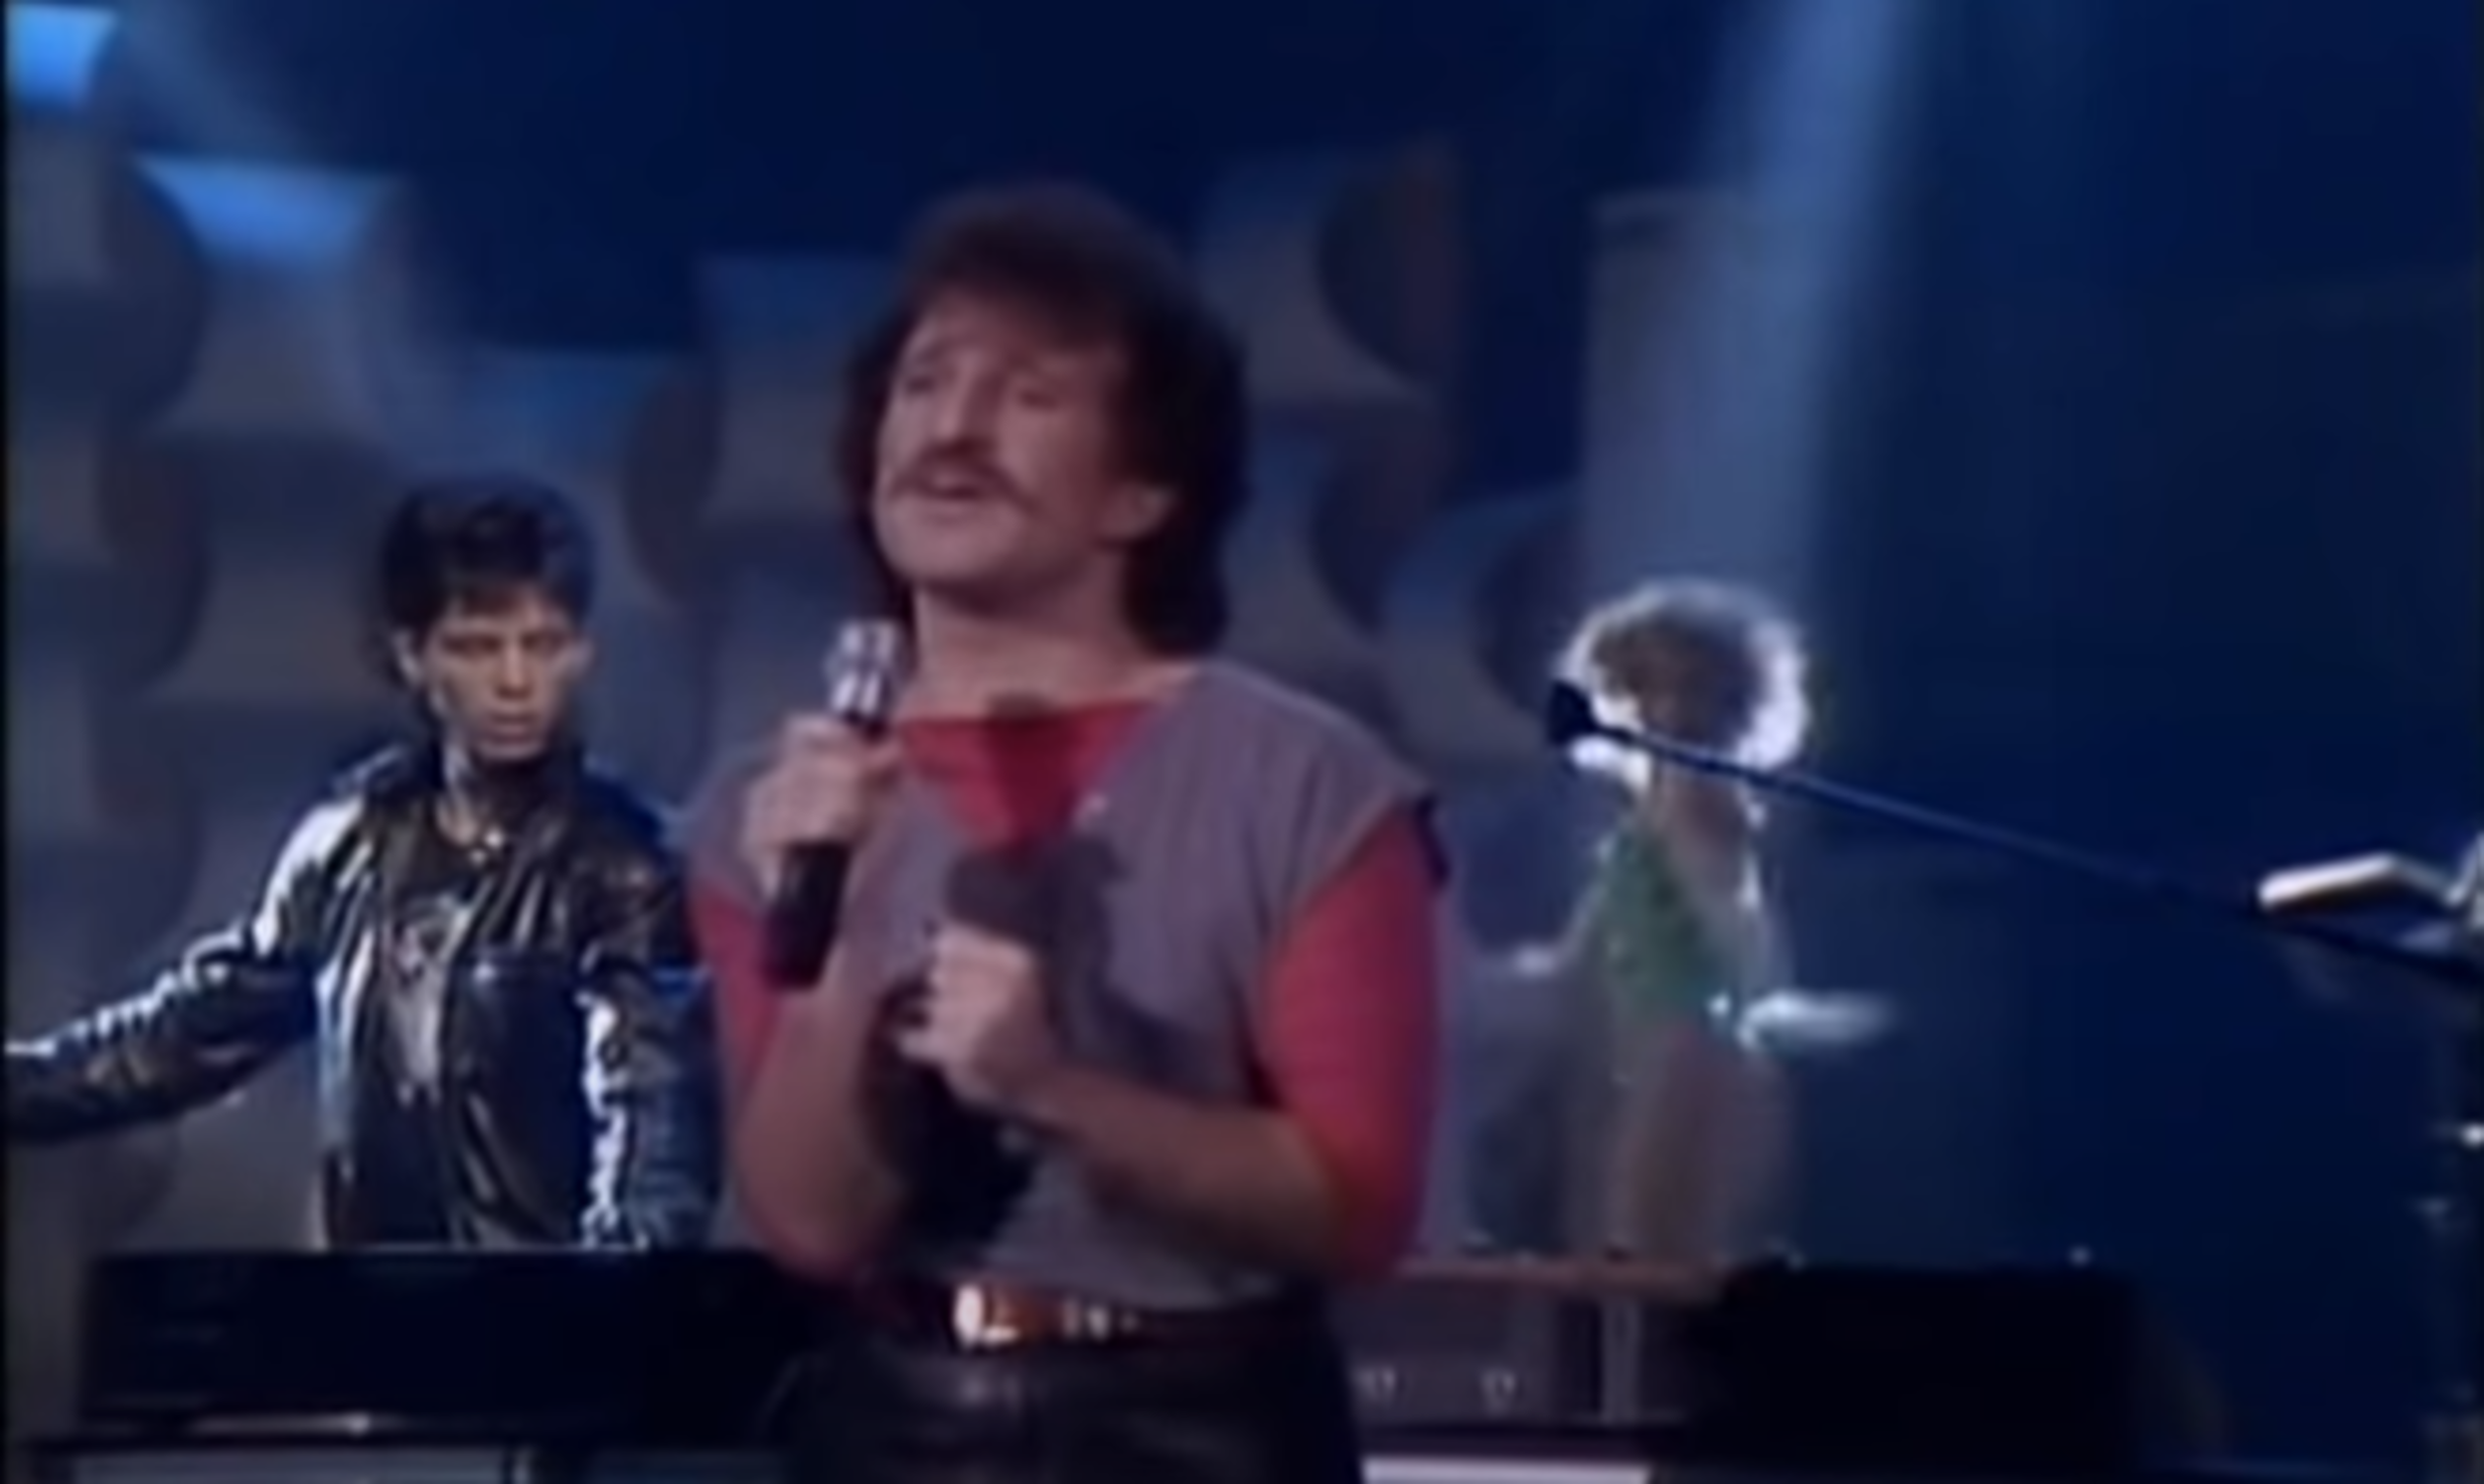 <p><a href="https://www.youtube.com/watch?v=cy46iOwWQiE">Matthew Wilder</a> will forever be associated with a song that made it all the way to No. 5 on the <em>Billboard</em> Hot 100. It still has a place in the realm of pop culture through movies and various covers over the years. Wilder couldn't sustain his success as a solo artist but made a living as a well-respected producer, working with the likes of No Doubt and Miley Cyrus.</p><p>You may also like: <a href='https://www.yardbarker.com/entertainment/articles/shot_by_shot_hollywoods_wildest_and_weirdest_remakes_012924/s1__28312799'>Shot by shot: Hollywood’s wildest and weirdest remakes</a></p>